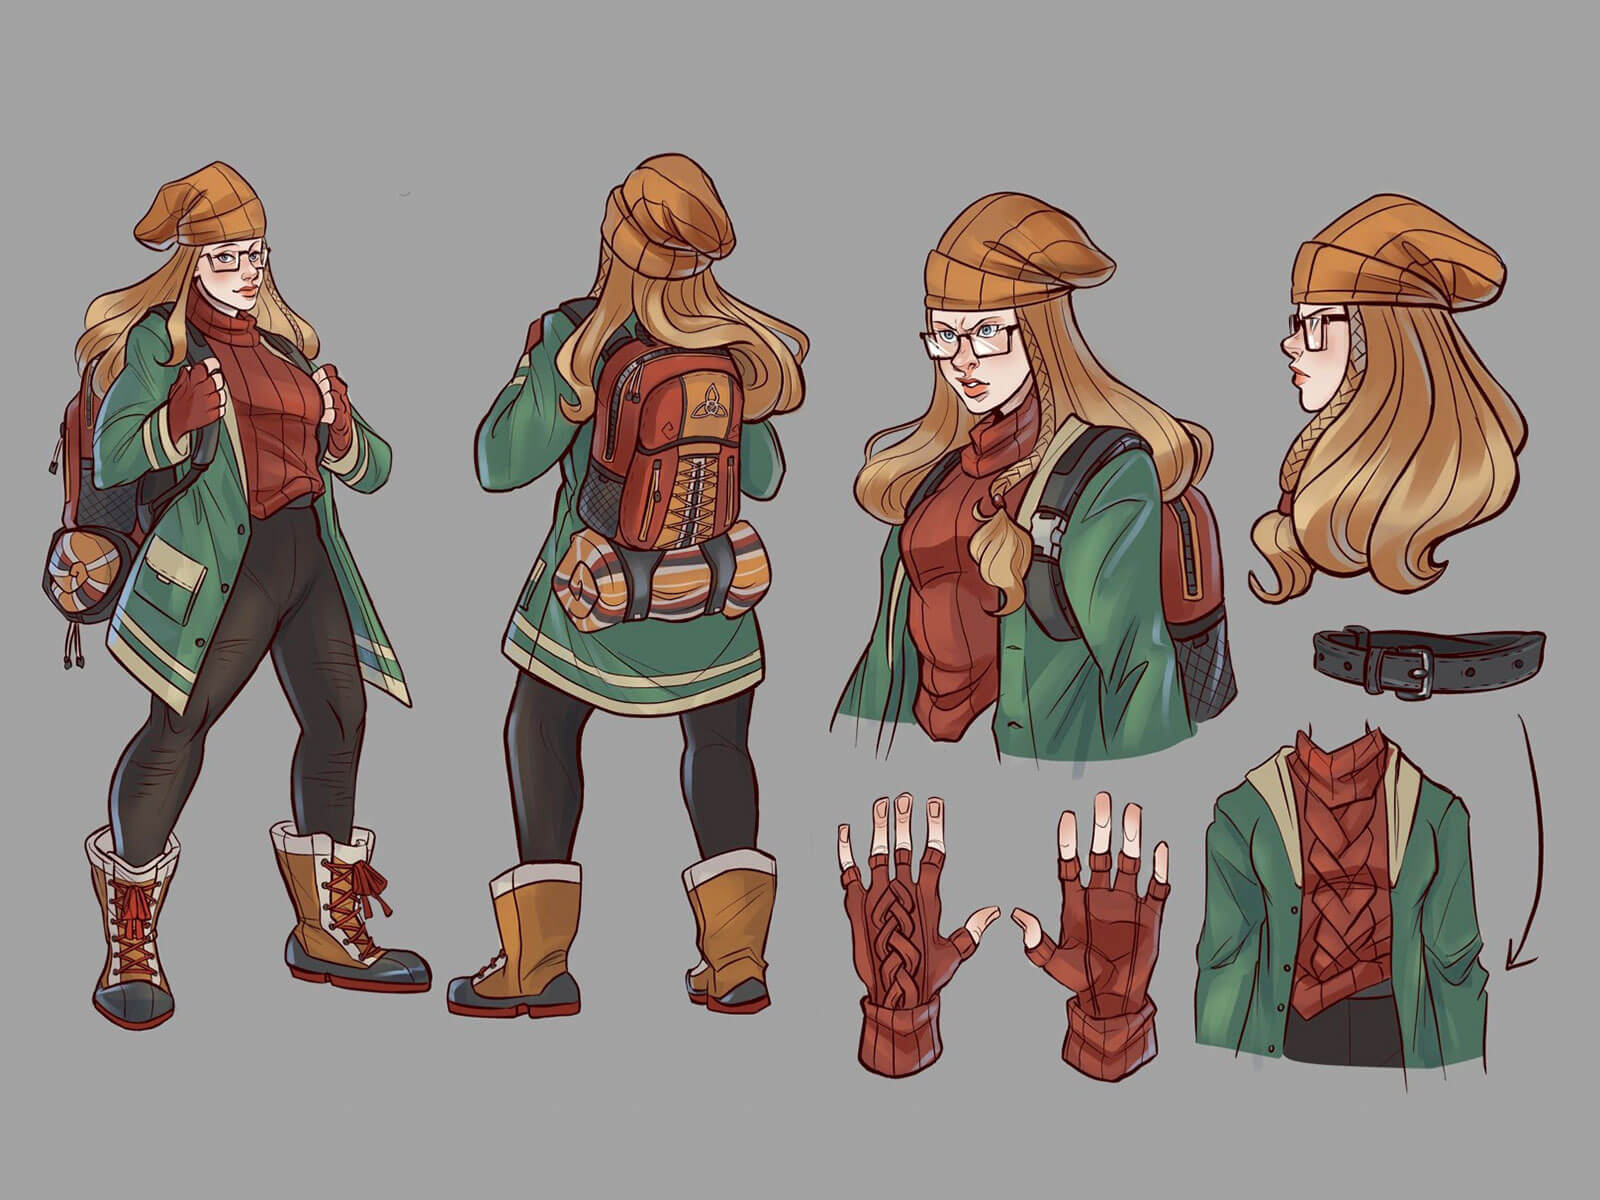 Woman in hiking outfit and gear